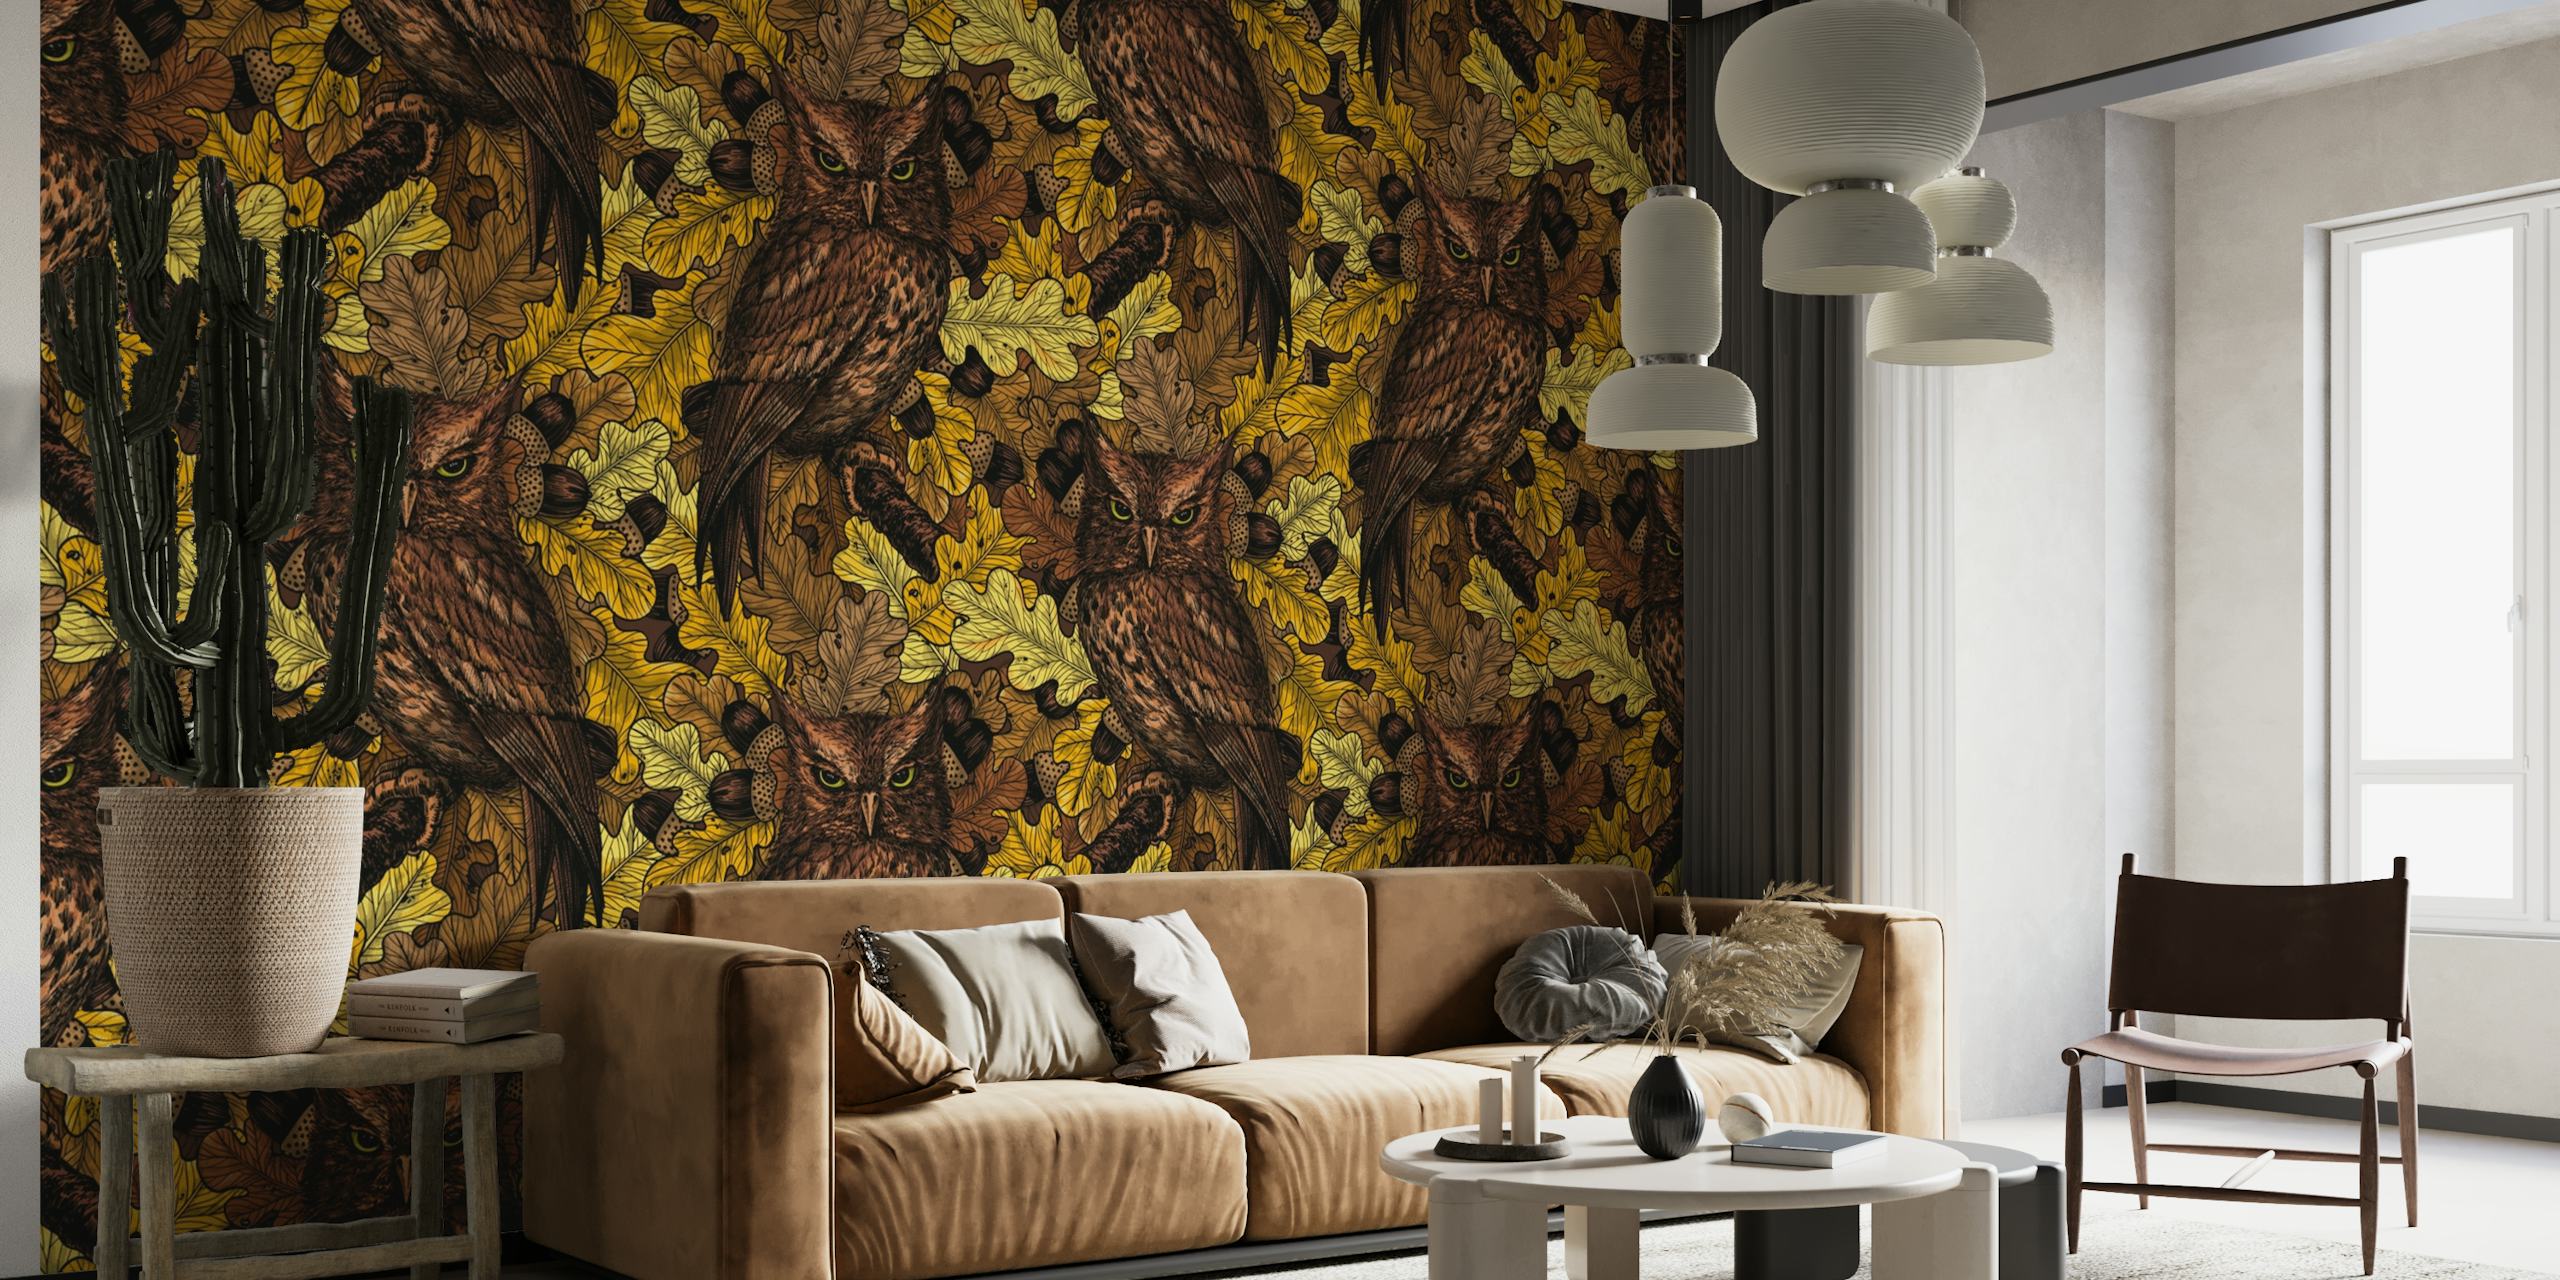 Autumn Owls wall mural with a pattern of owls and fall leaves